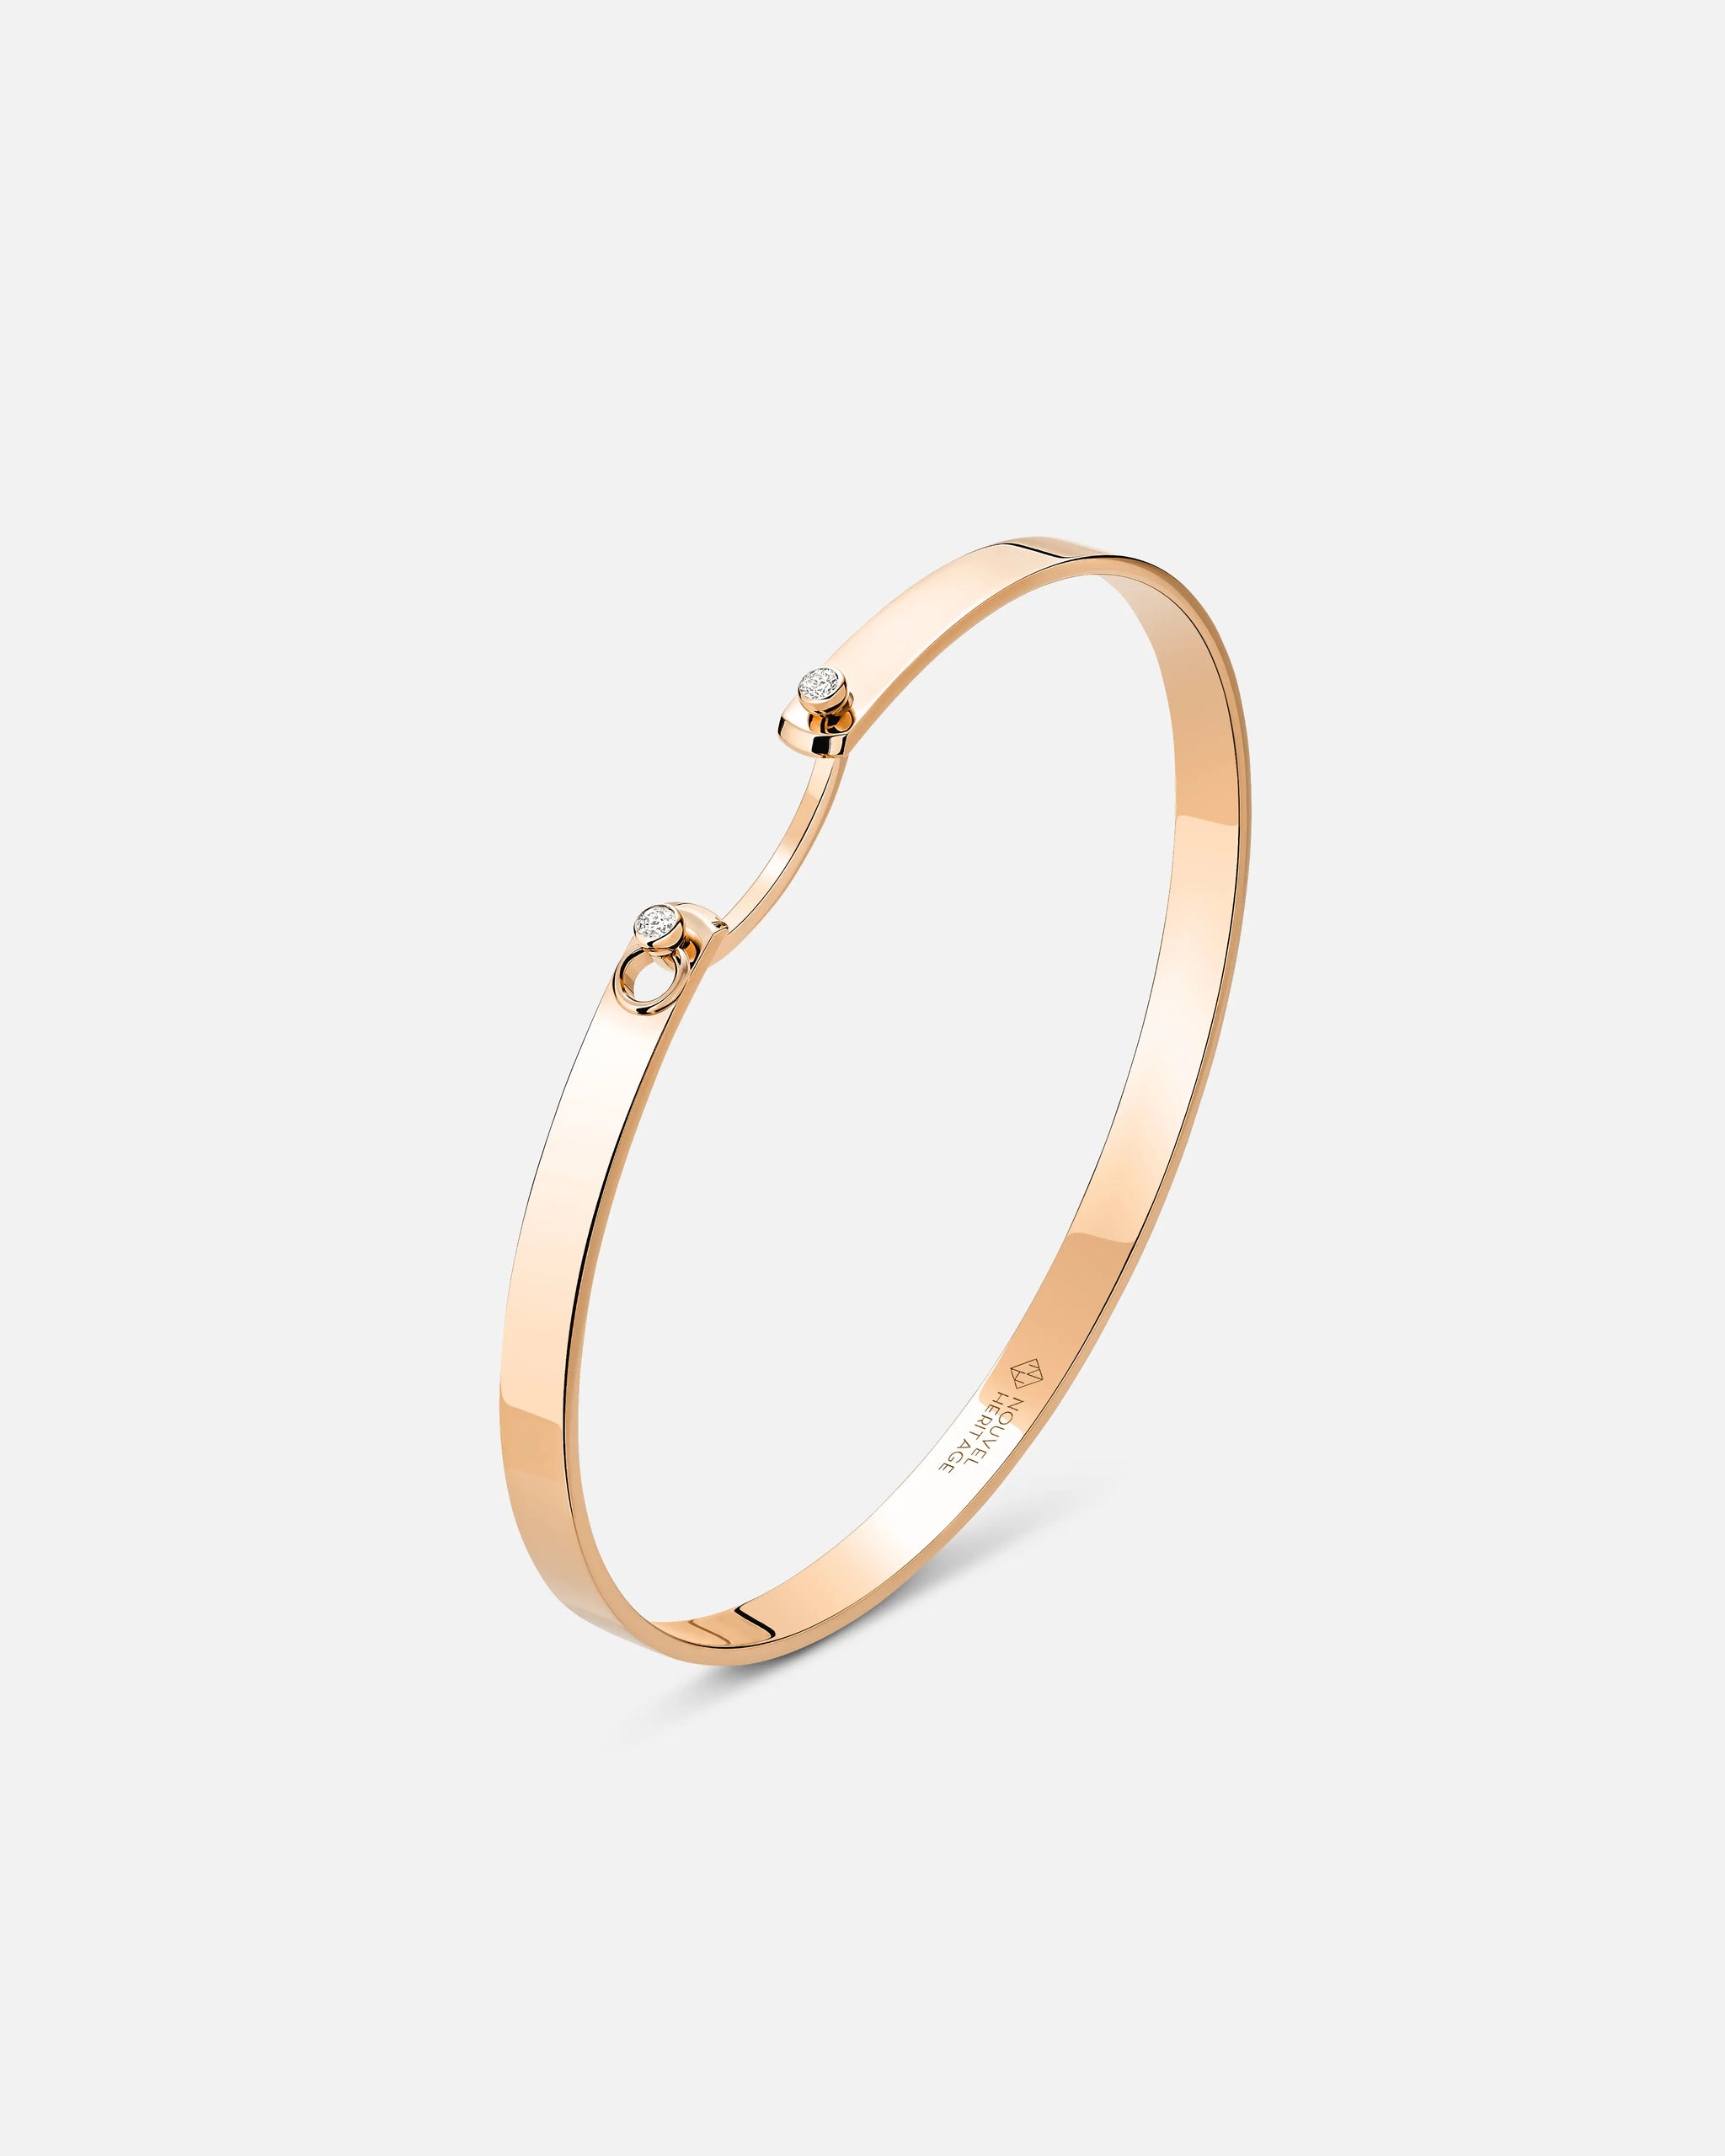 Monday Morning Mood Bangle in Rose Gold - 1 - Nouvel Heritage